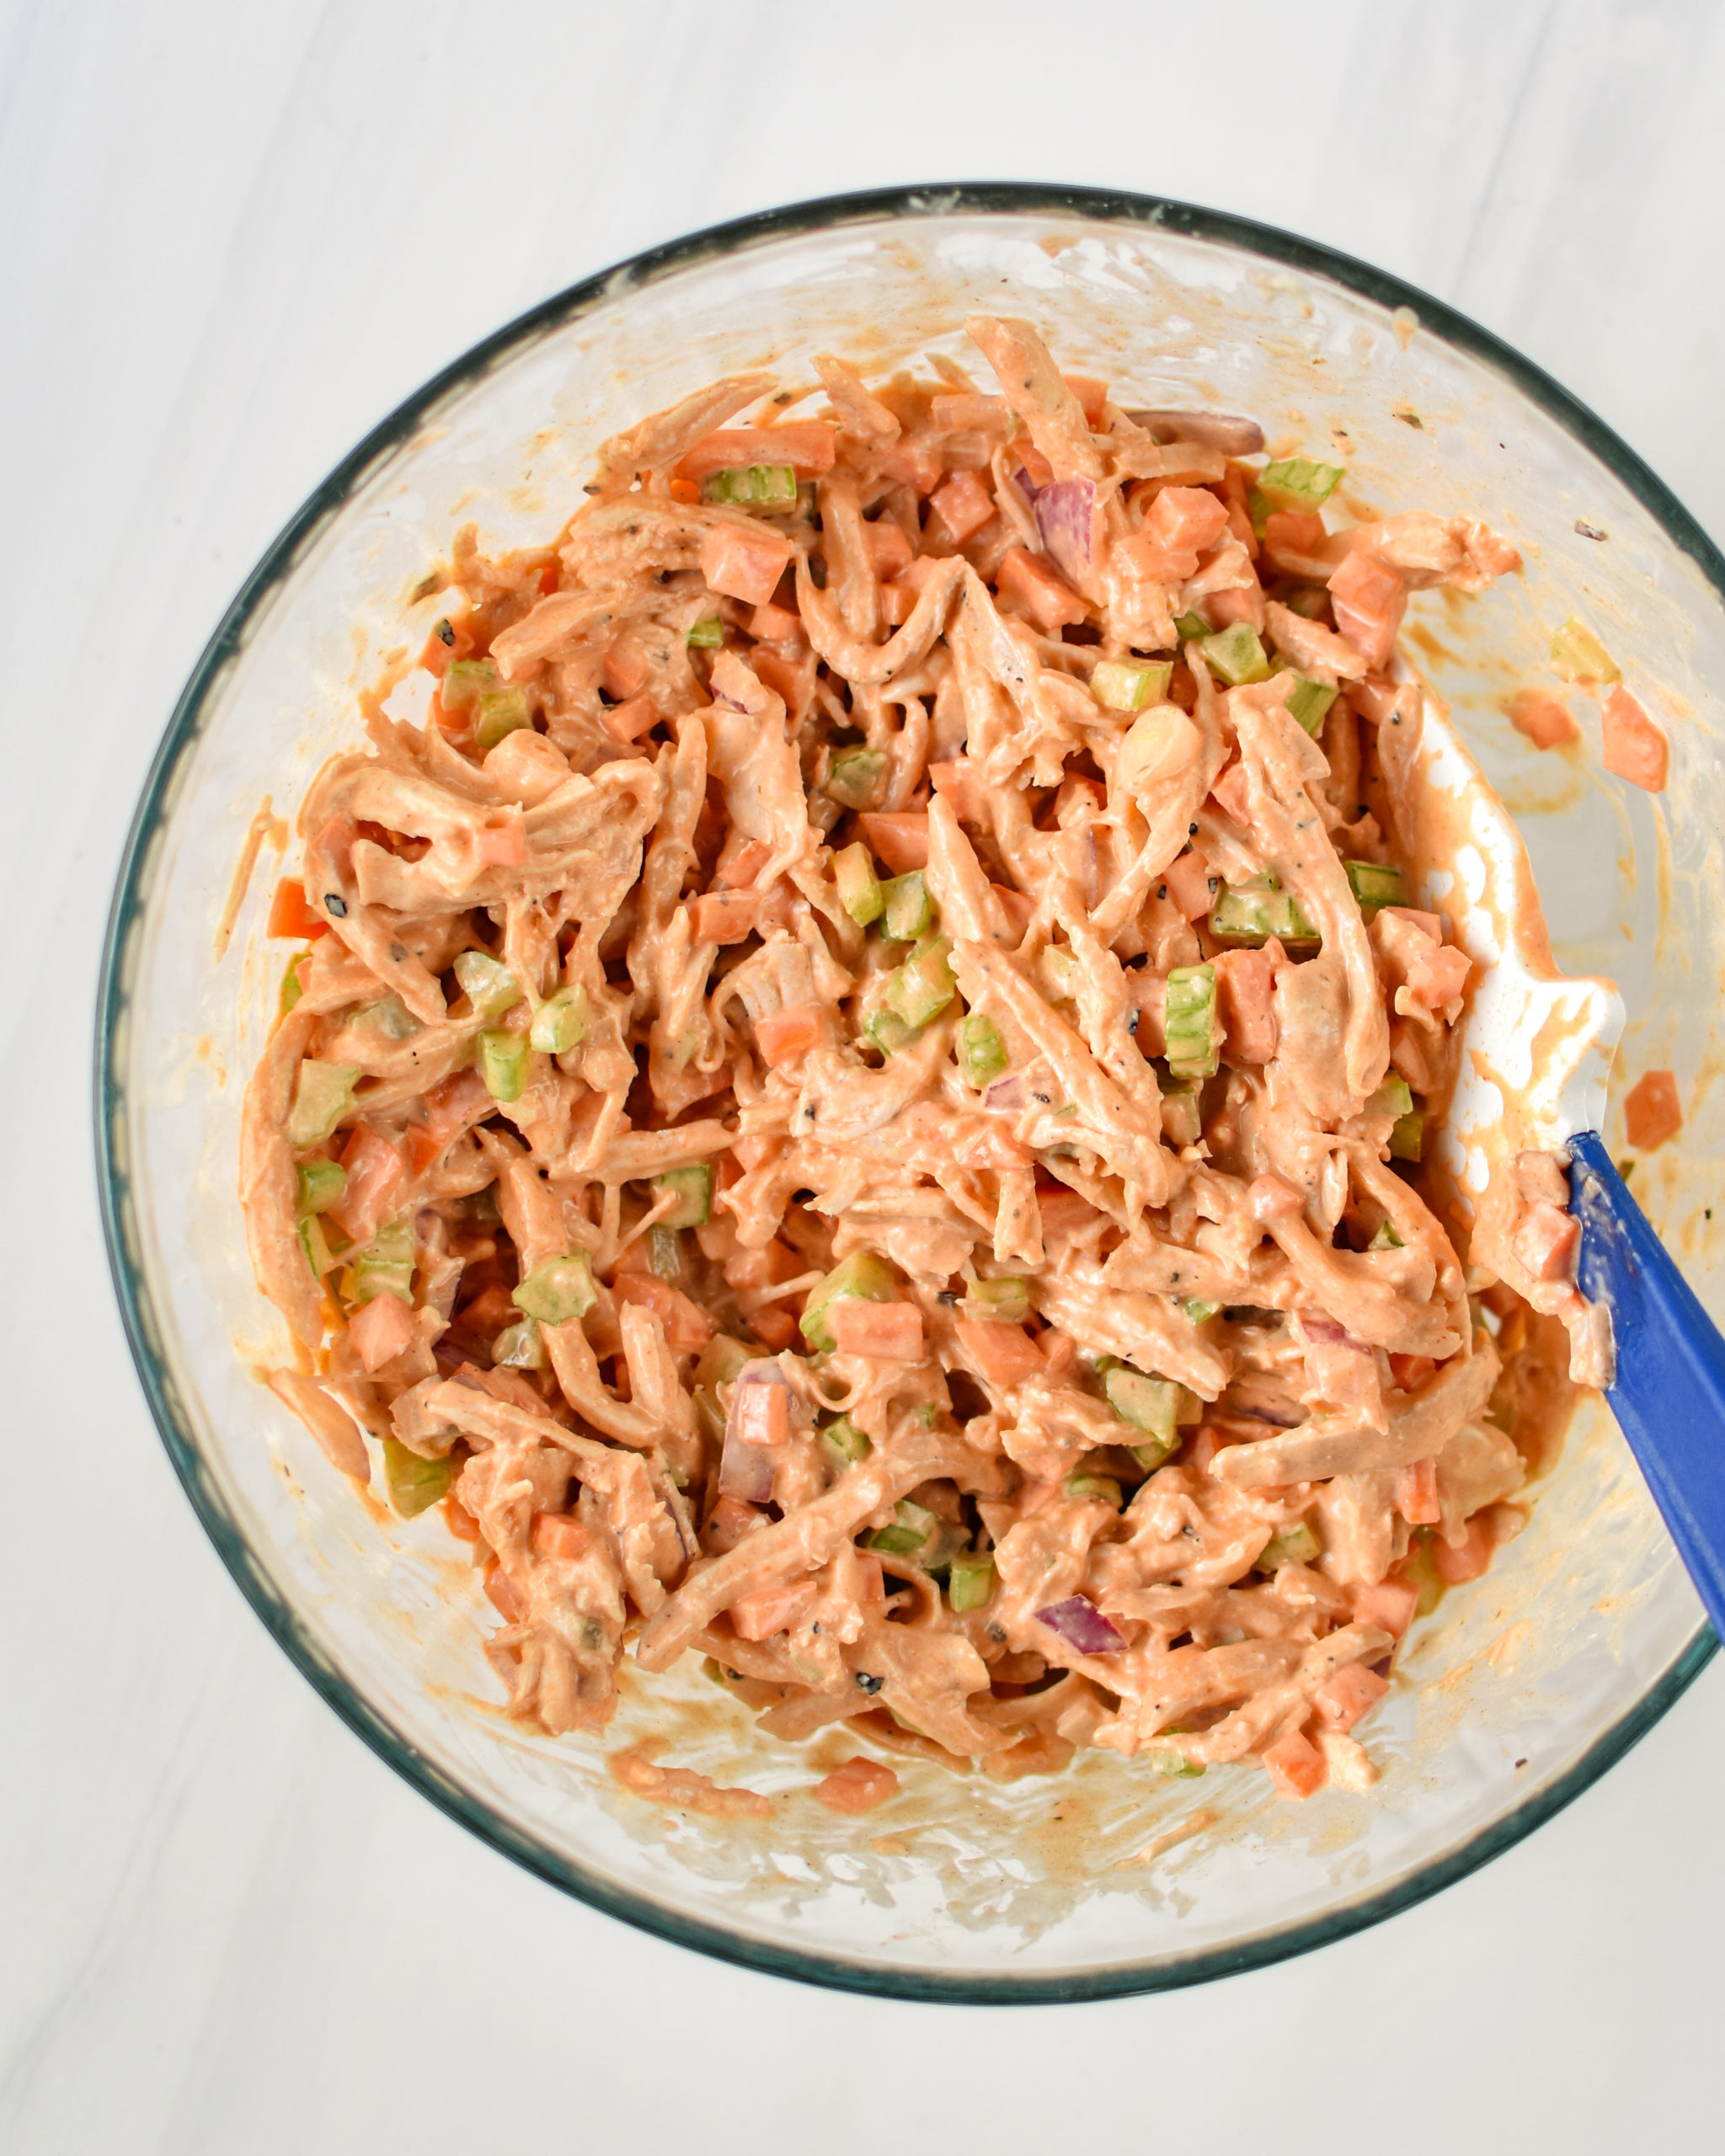 Buffalo chicken salad mixed up in a large pyrex dish.